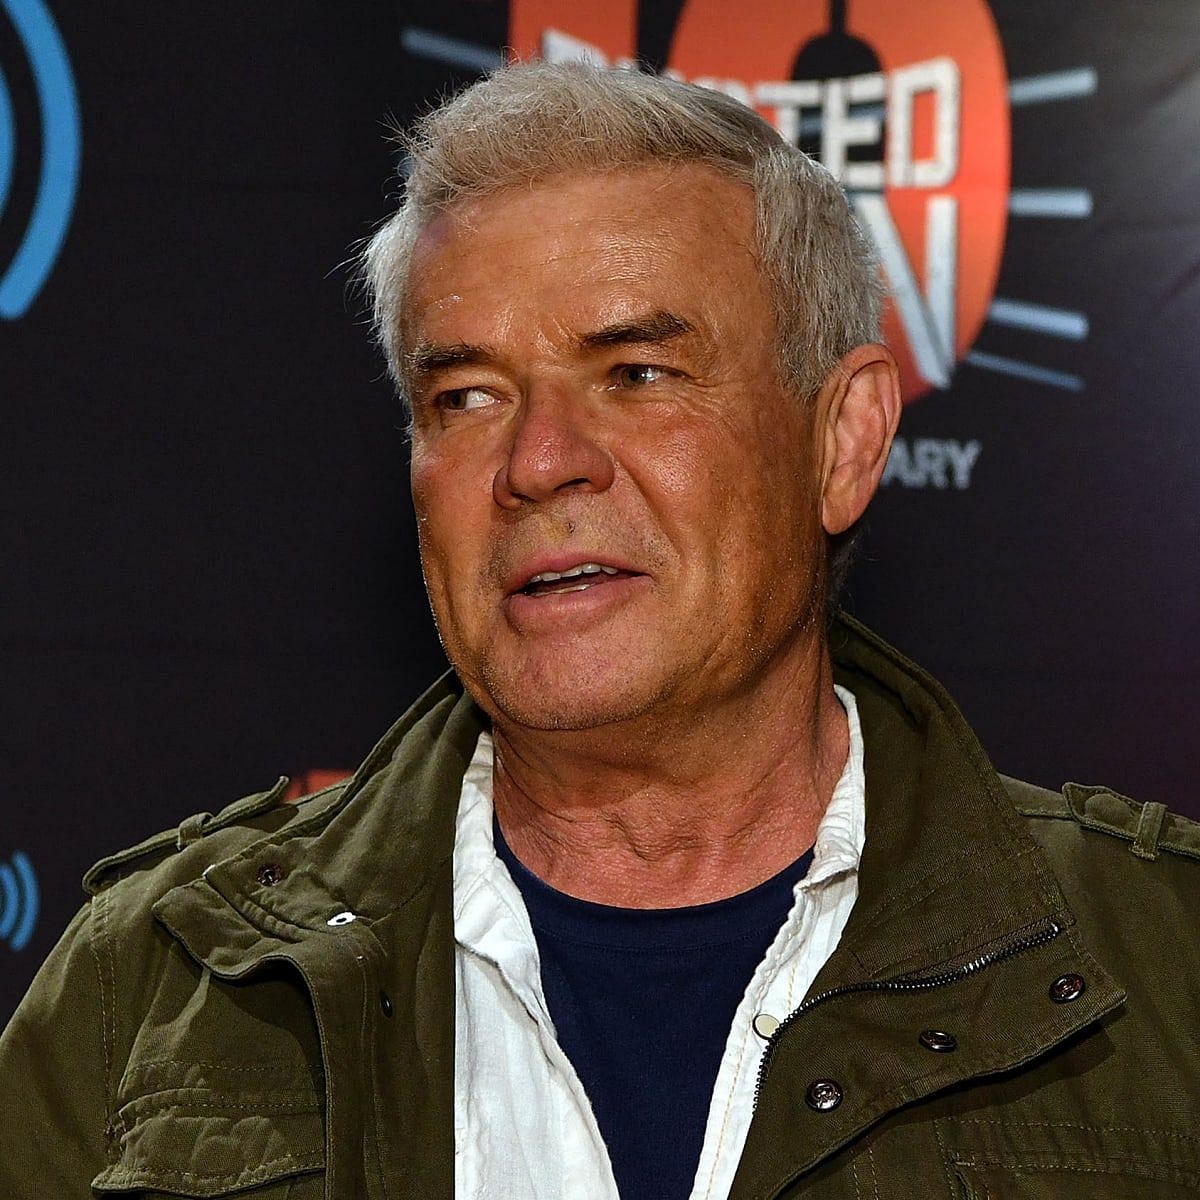 Eric Bischoff has been all over the industry over the last few years.